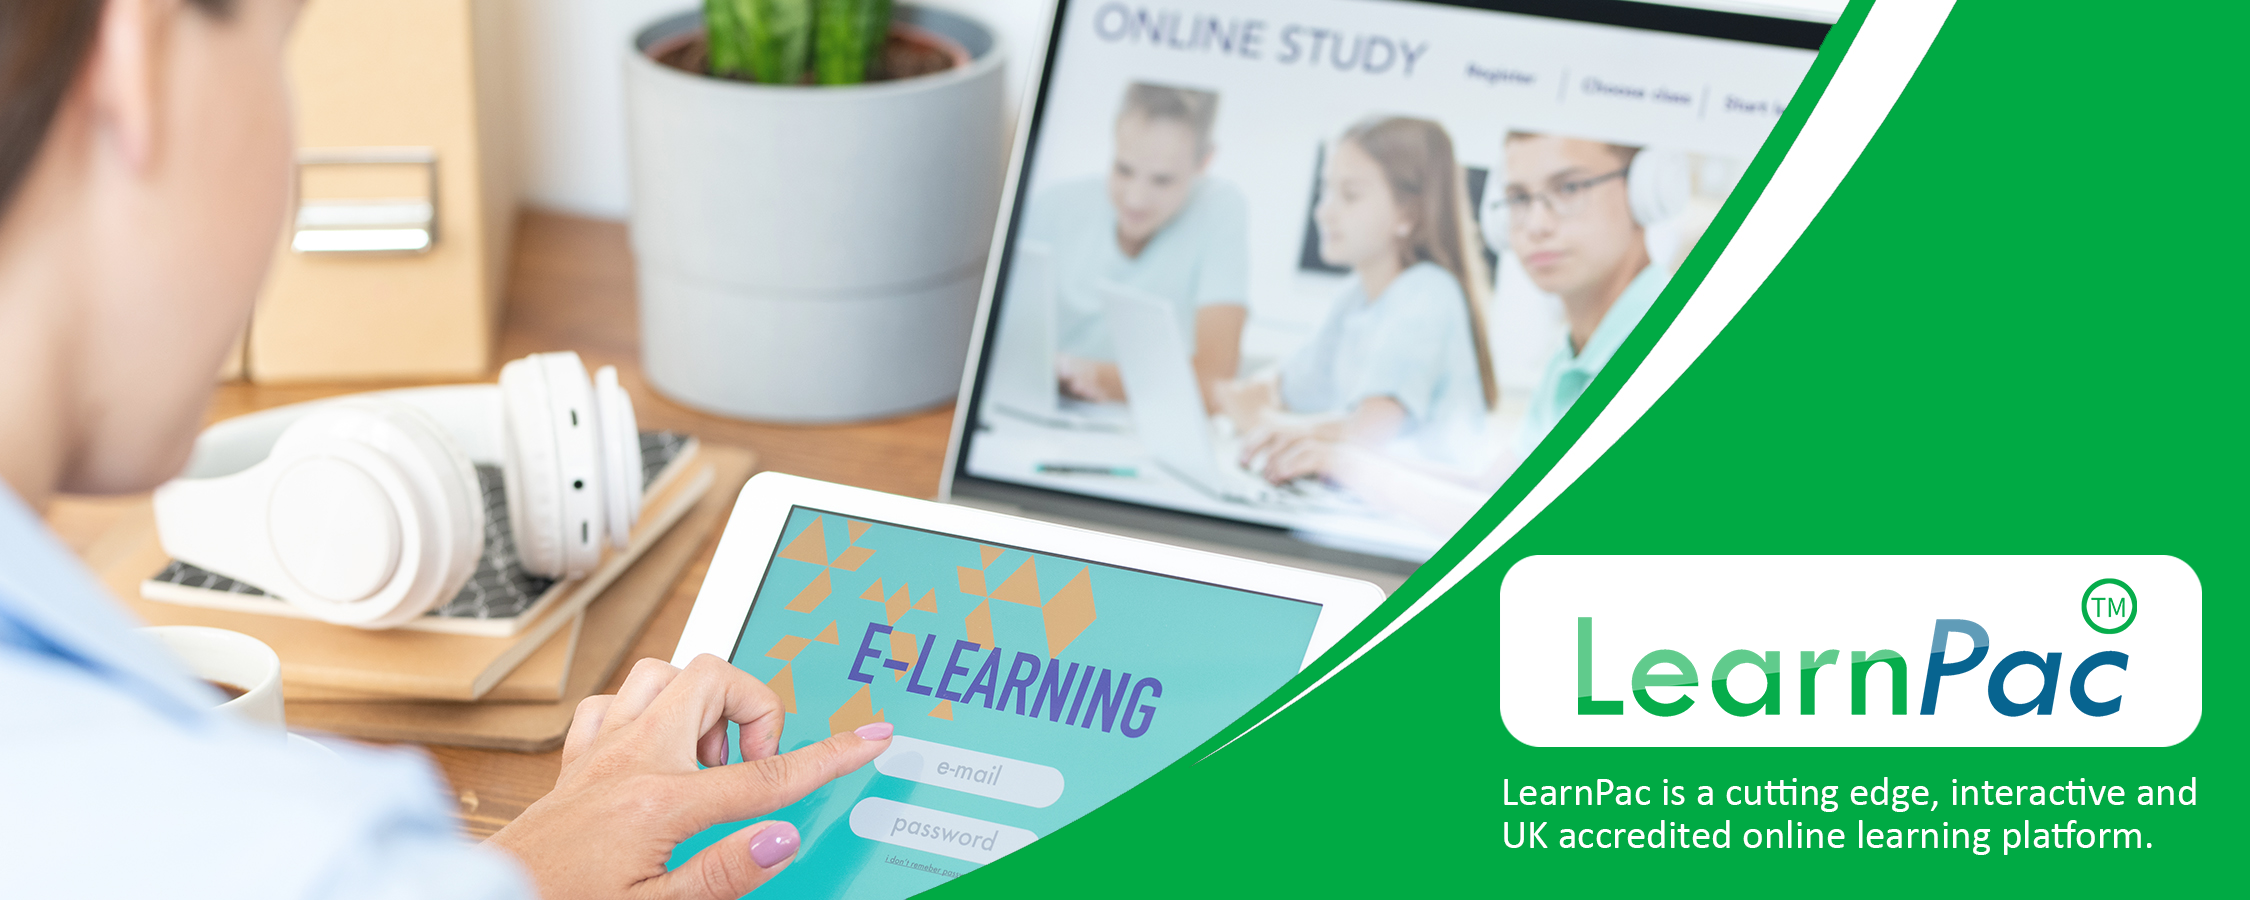 CQC Mandatory Training Courses for Healthcare Professionals - Online Learning Courses - E-Learning Courses - LearnPac